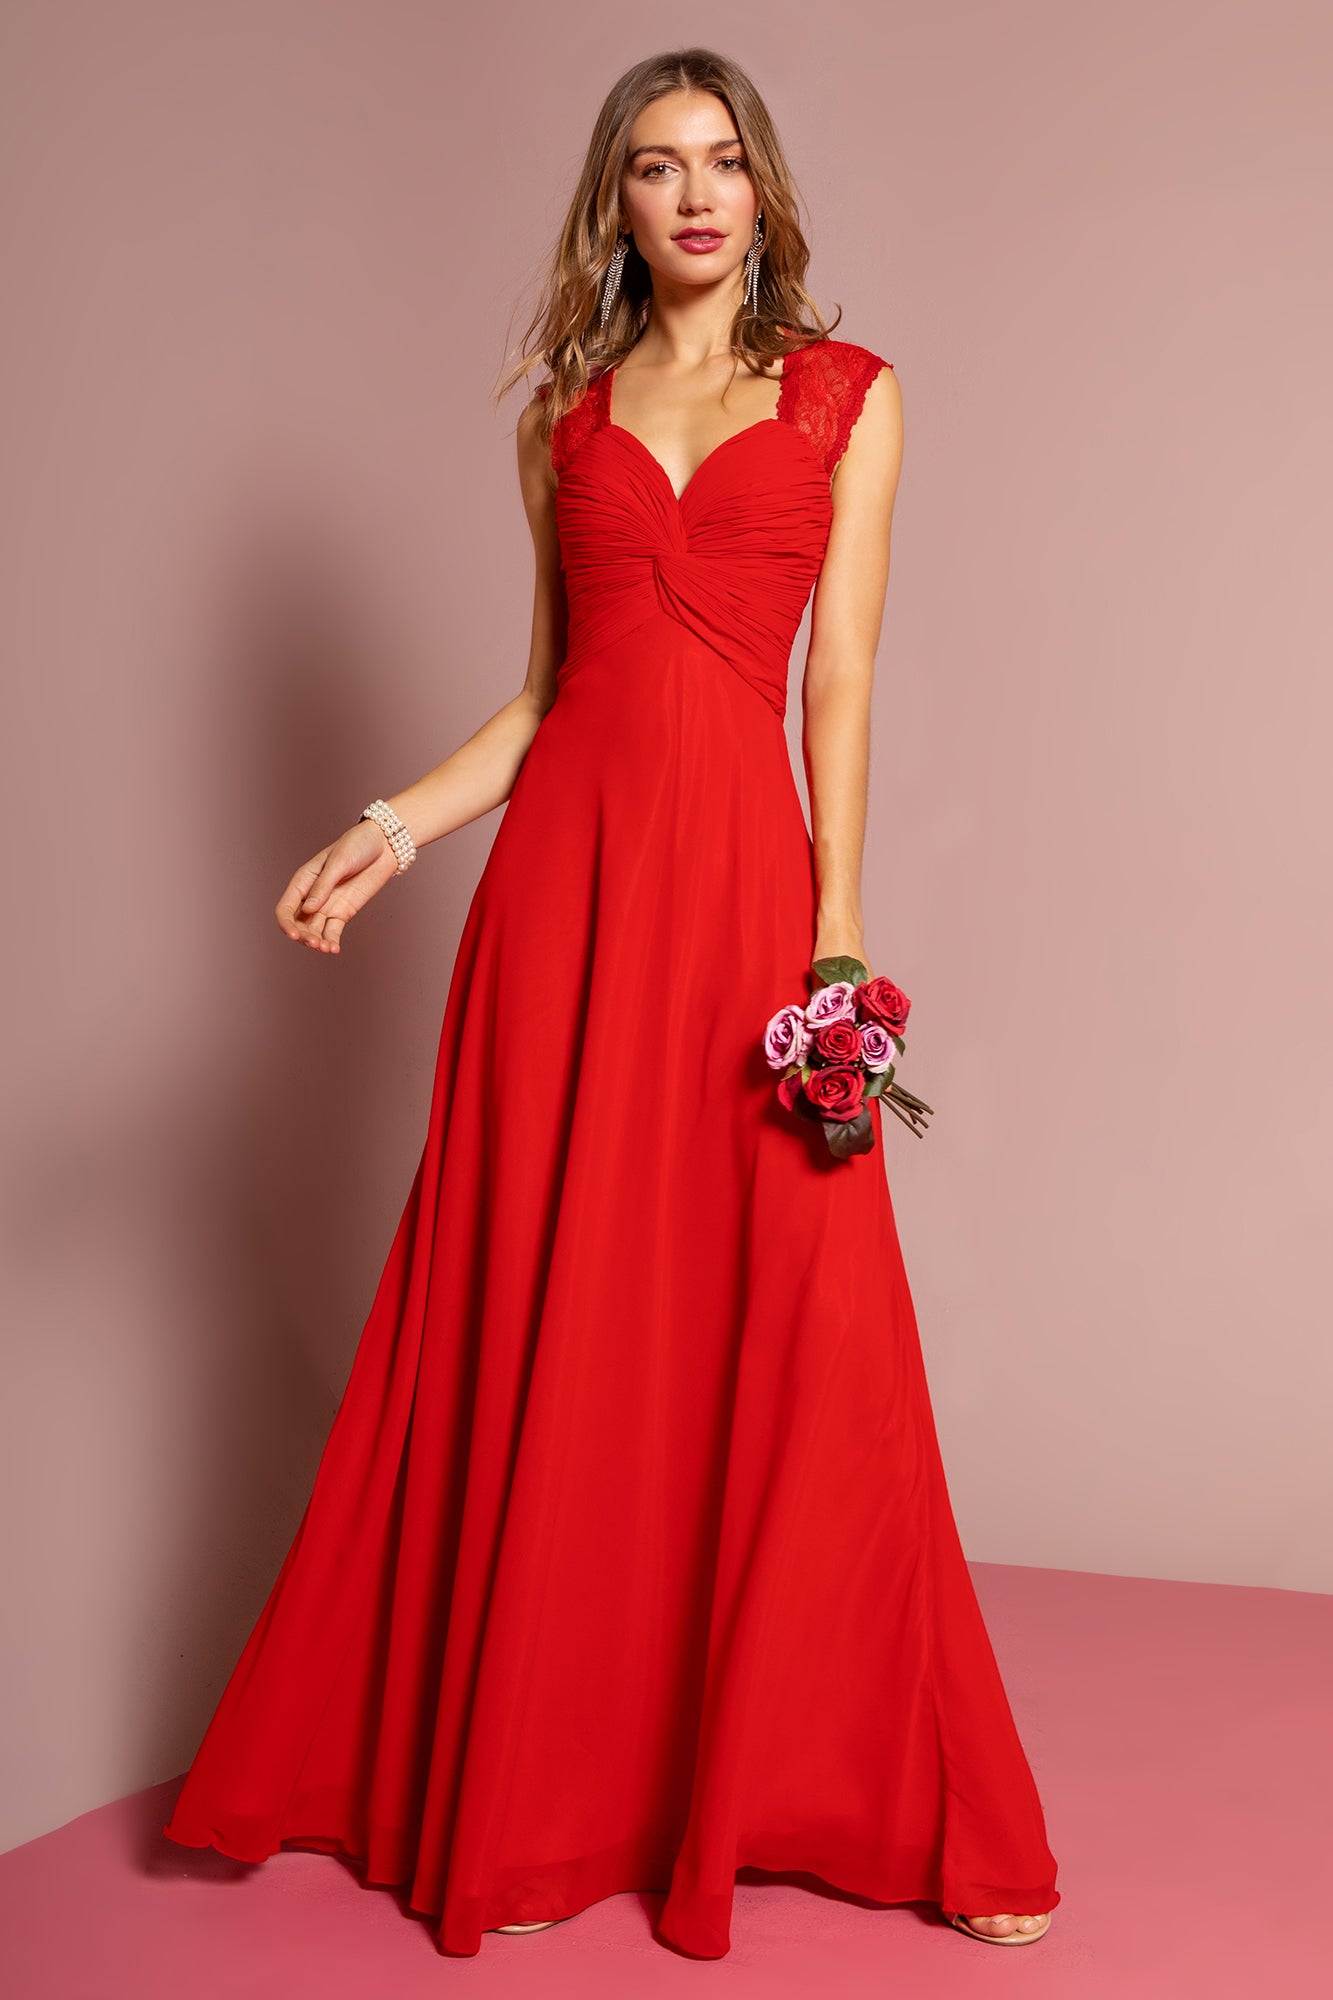 GLS COLLECTIVE - GL1376 - Red Size M / Black Size 3XL - Long Prom / Mother of the Bride / Bridesmaid Dress